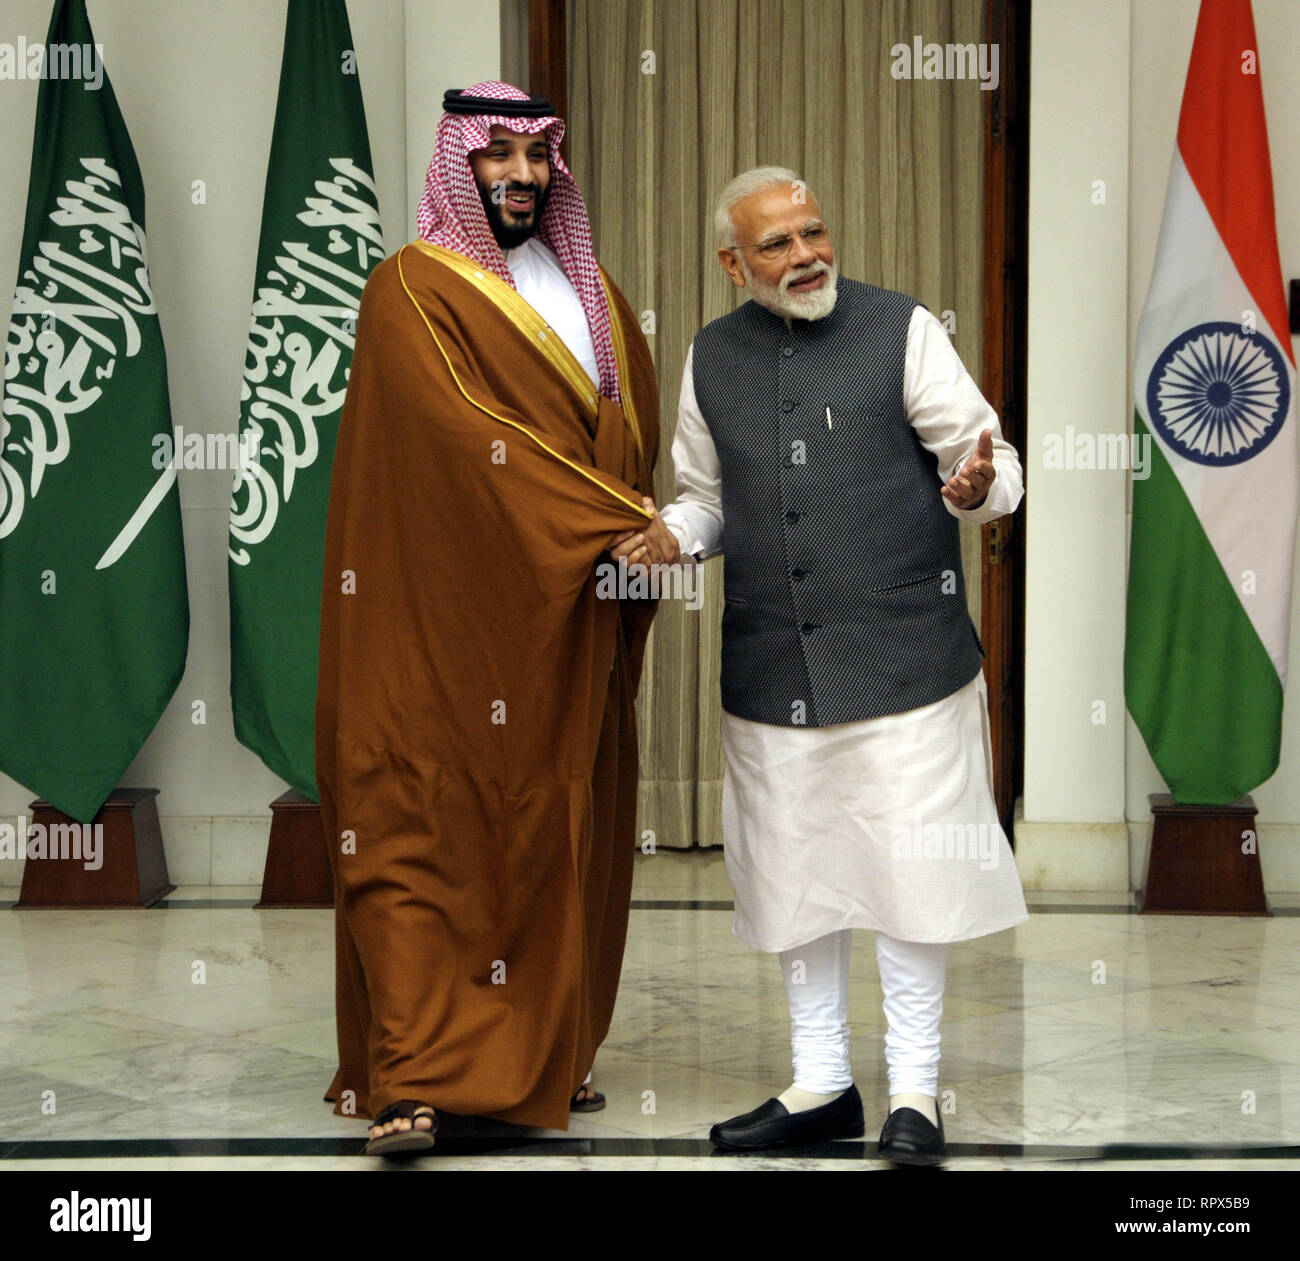 Prime Minister Narendra Modi with Saudi Arabia's Crown Prince Mohammed bin Salman prior to a meeting at Hyderabad House, in New Delhi, India  Wednesda Stock Photo